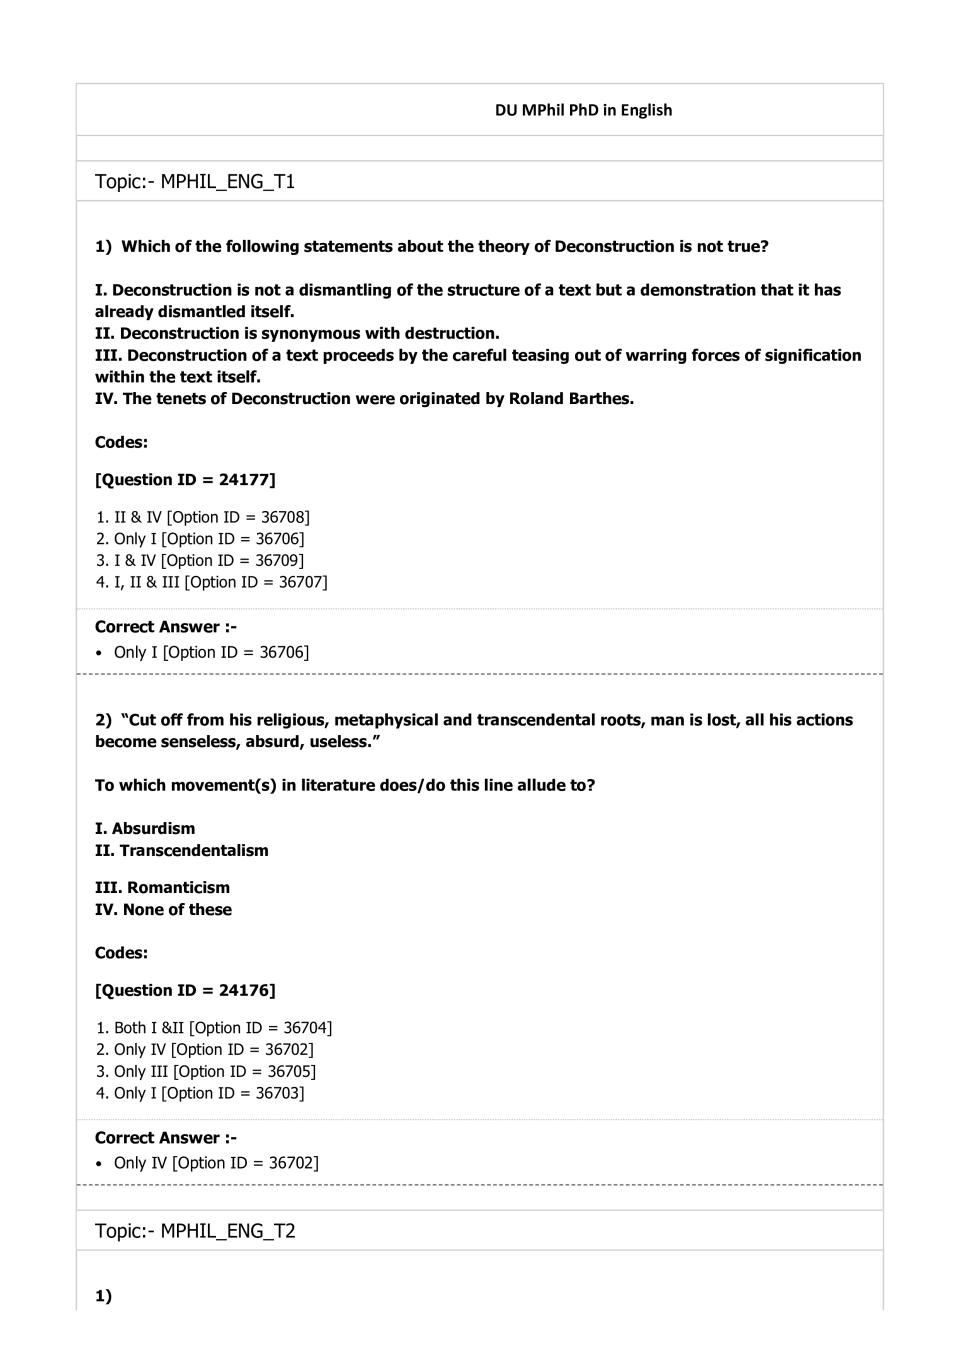 DUET Question Paper 2019 for M.Phil Ph.D English - Page 1